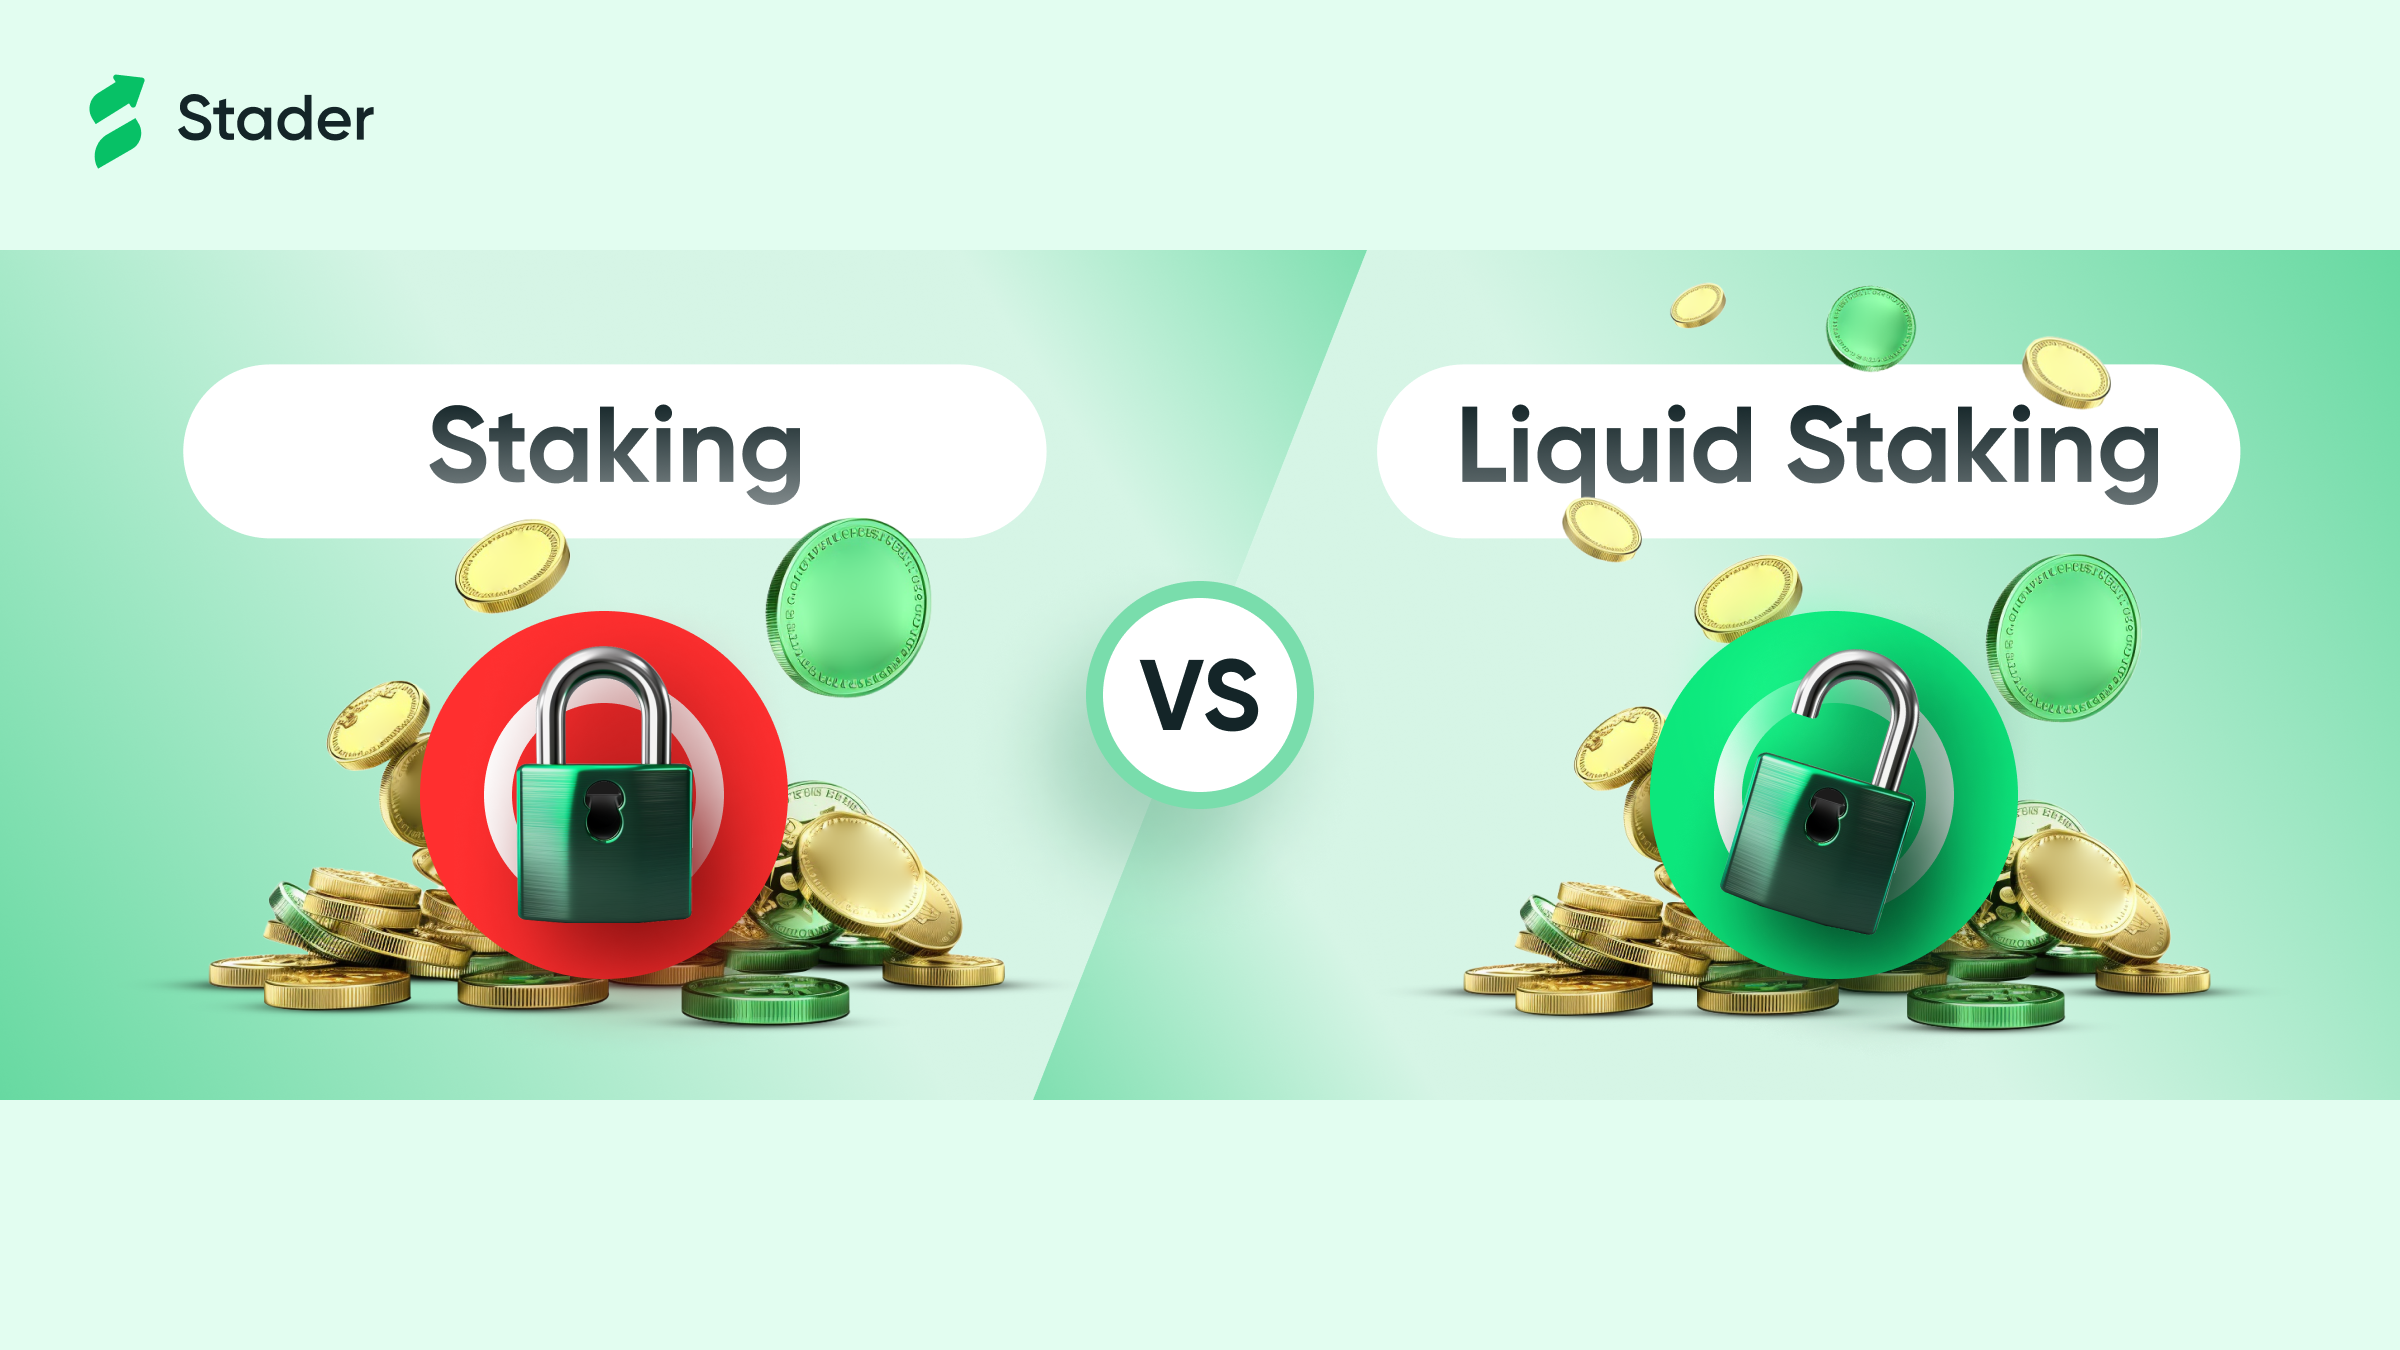 What's the difference between staking and liquid staking?